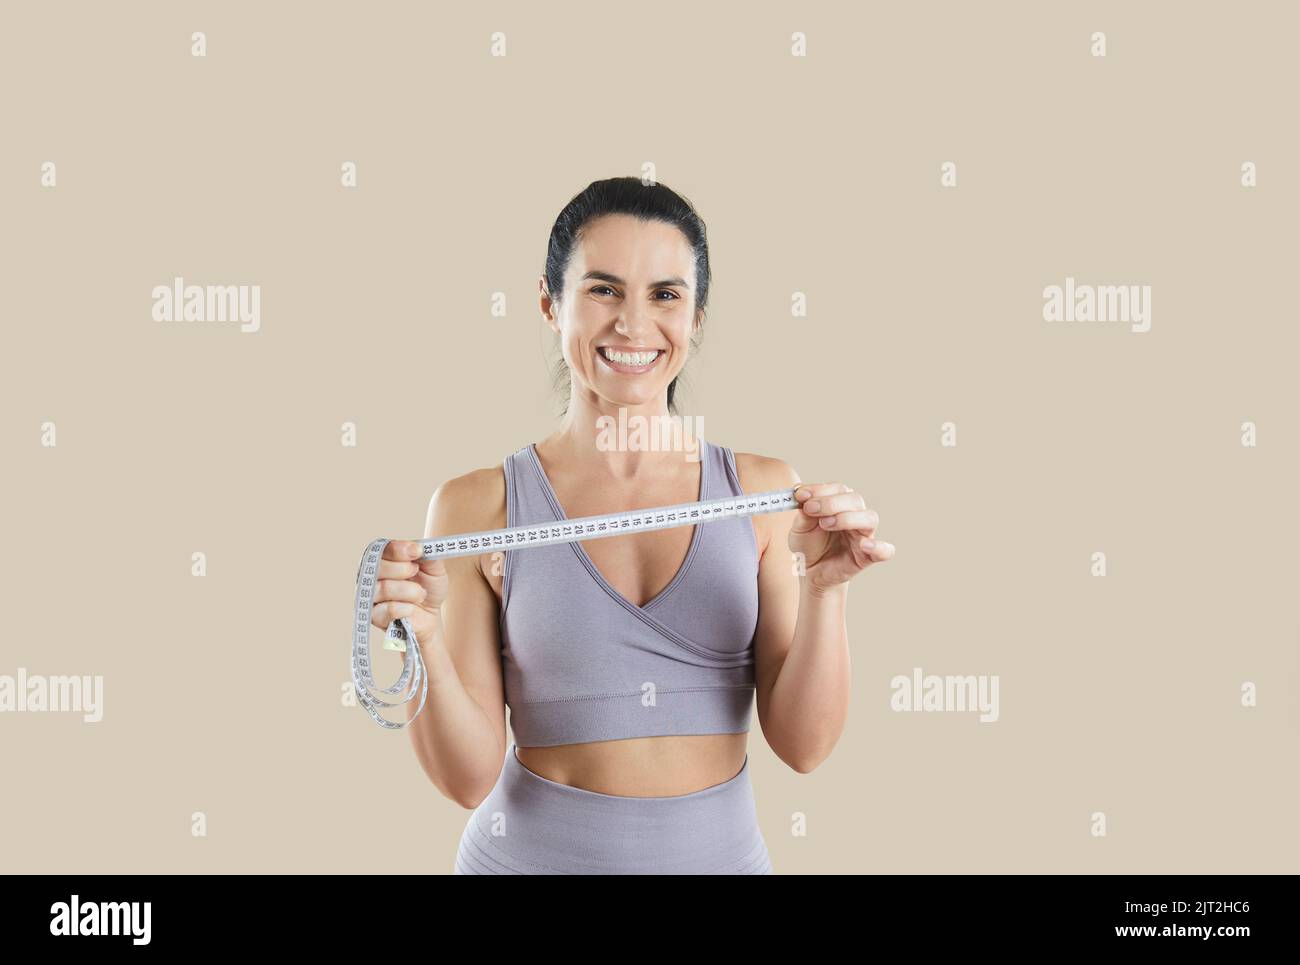 Female sports trainer or fitness instructor holding measuring tape isolated on beige background. Stock Photo